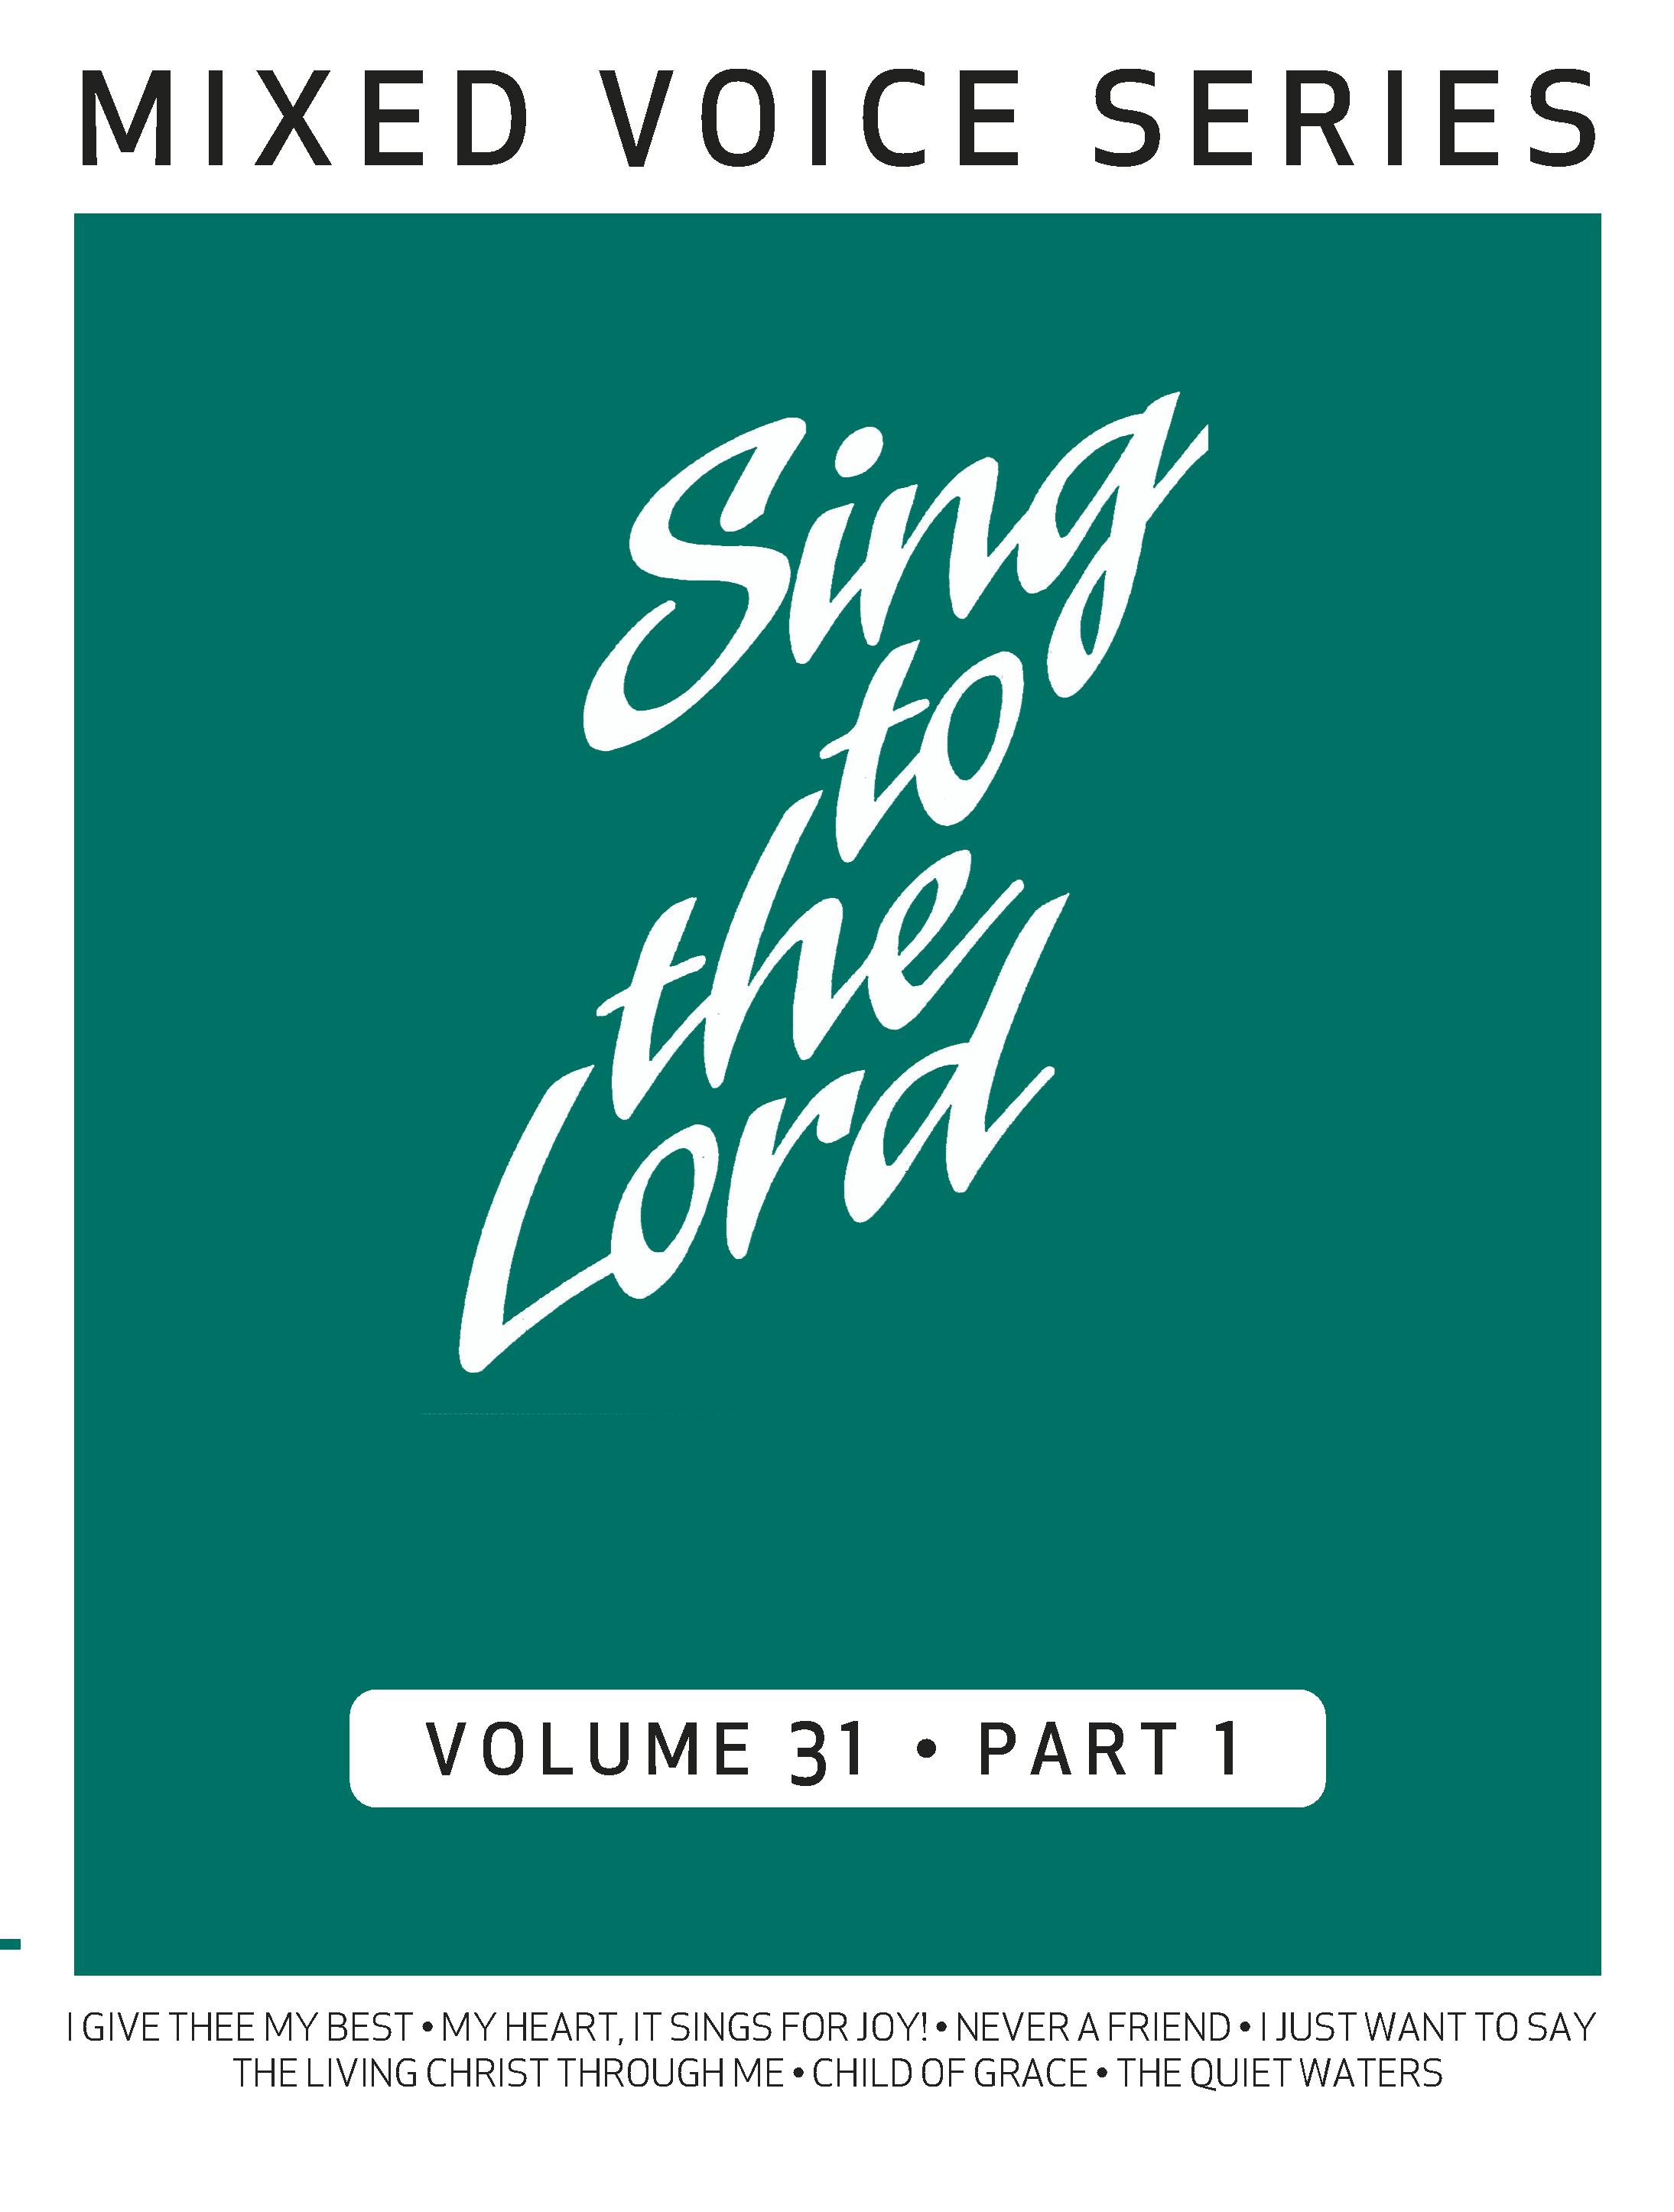 Sing to the Lord, Mixed Voice Series, Volume 31 Part 1